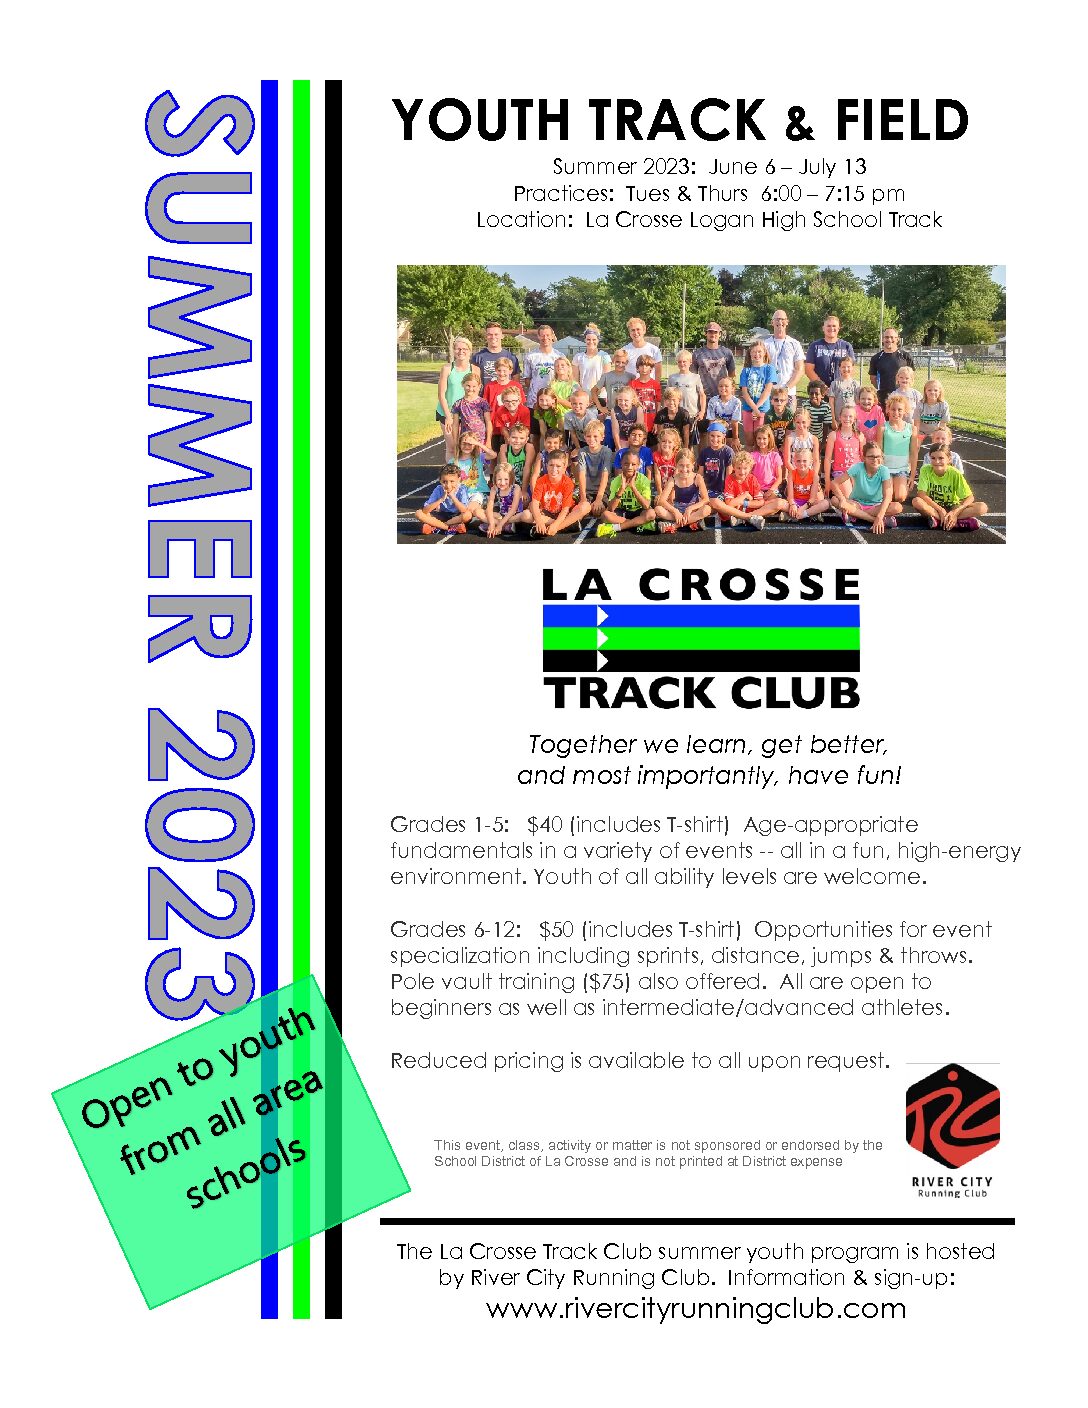 Youth Track & Field Summer 2023